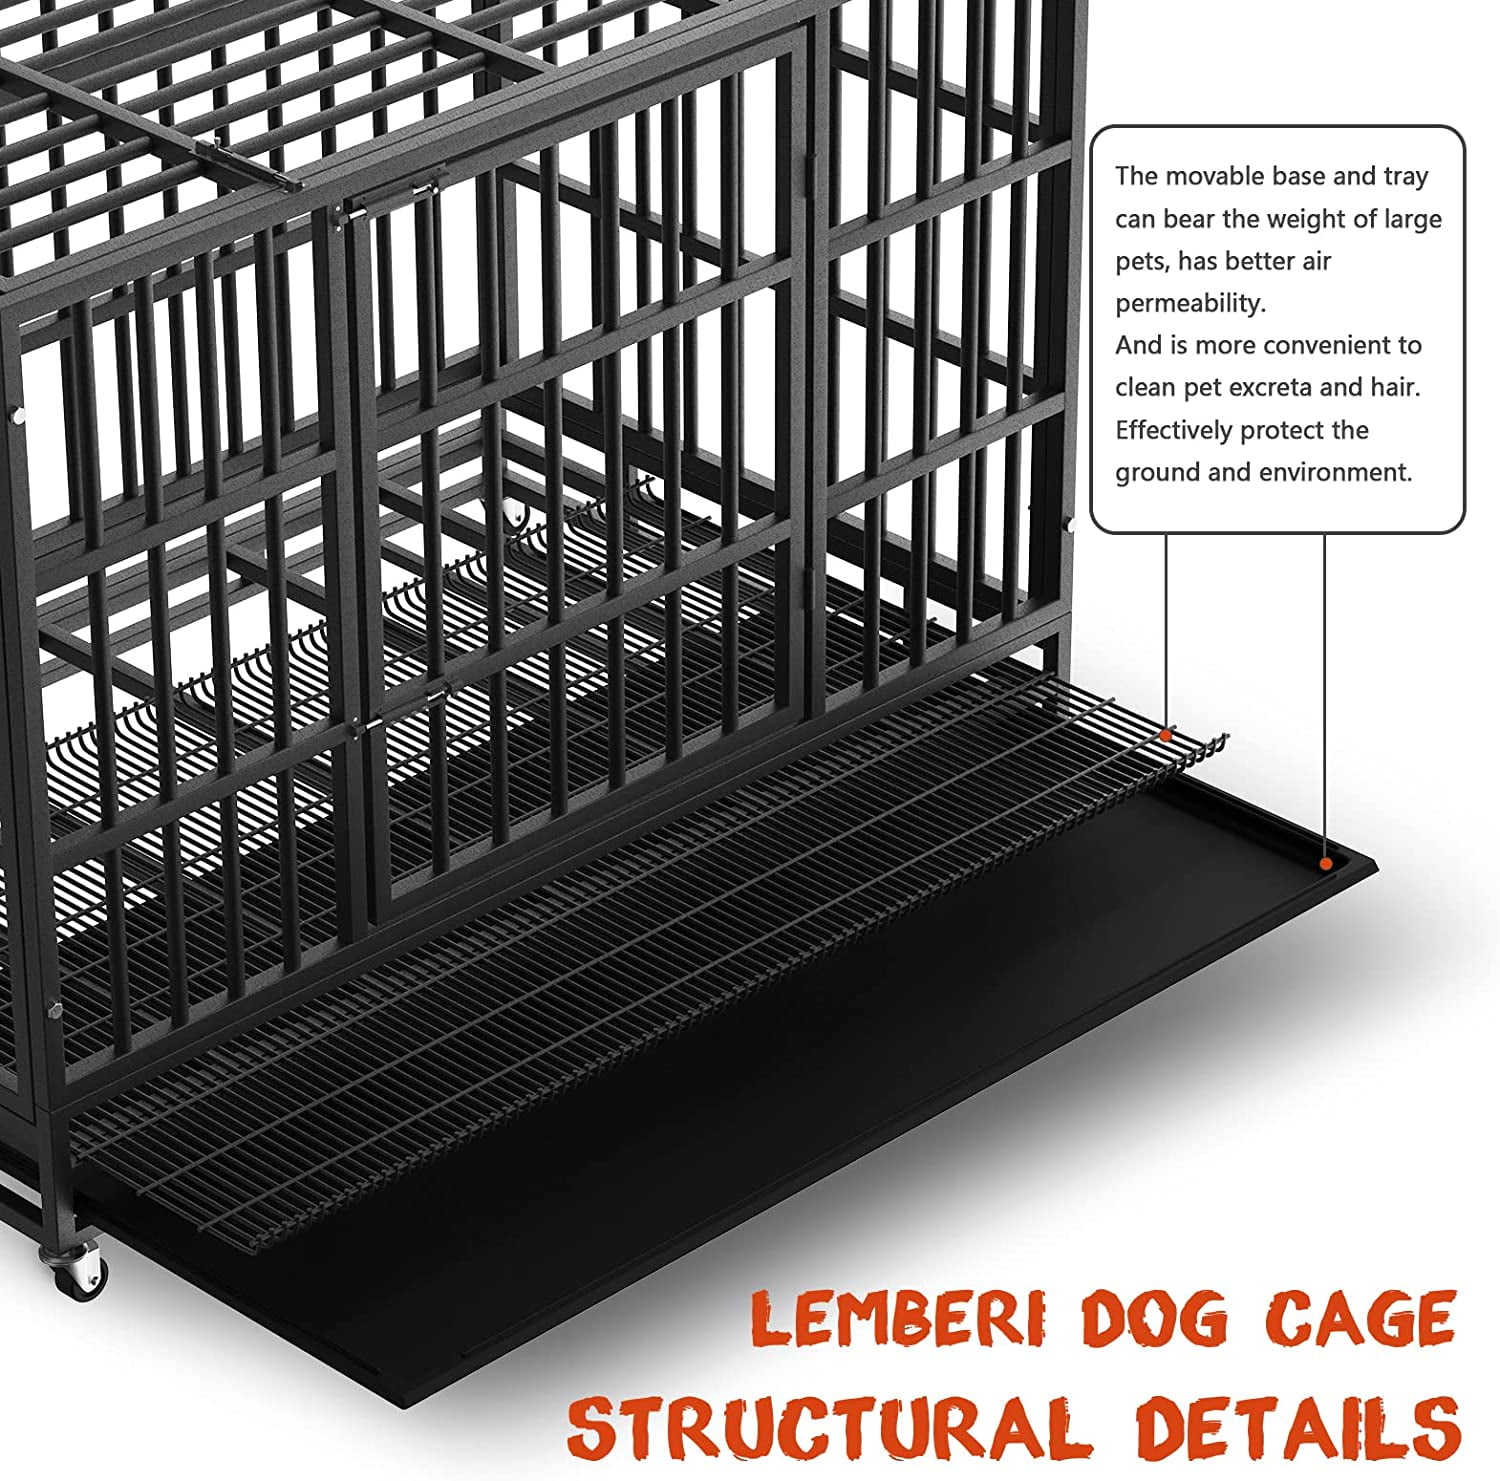 Otaid 48 Inch Heavy Duty Indestructible Dog Crate Cage Kennel with Wheels High Anxiety Dog Crate Sturdy Locks Design Extra Large XL XXL Dog Crate. Double Door and Removable Tray Design 